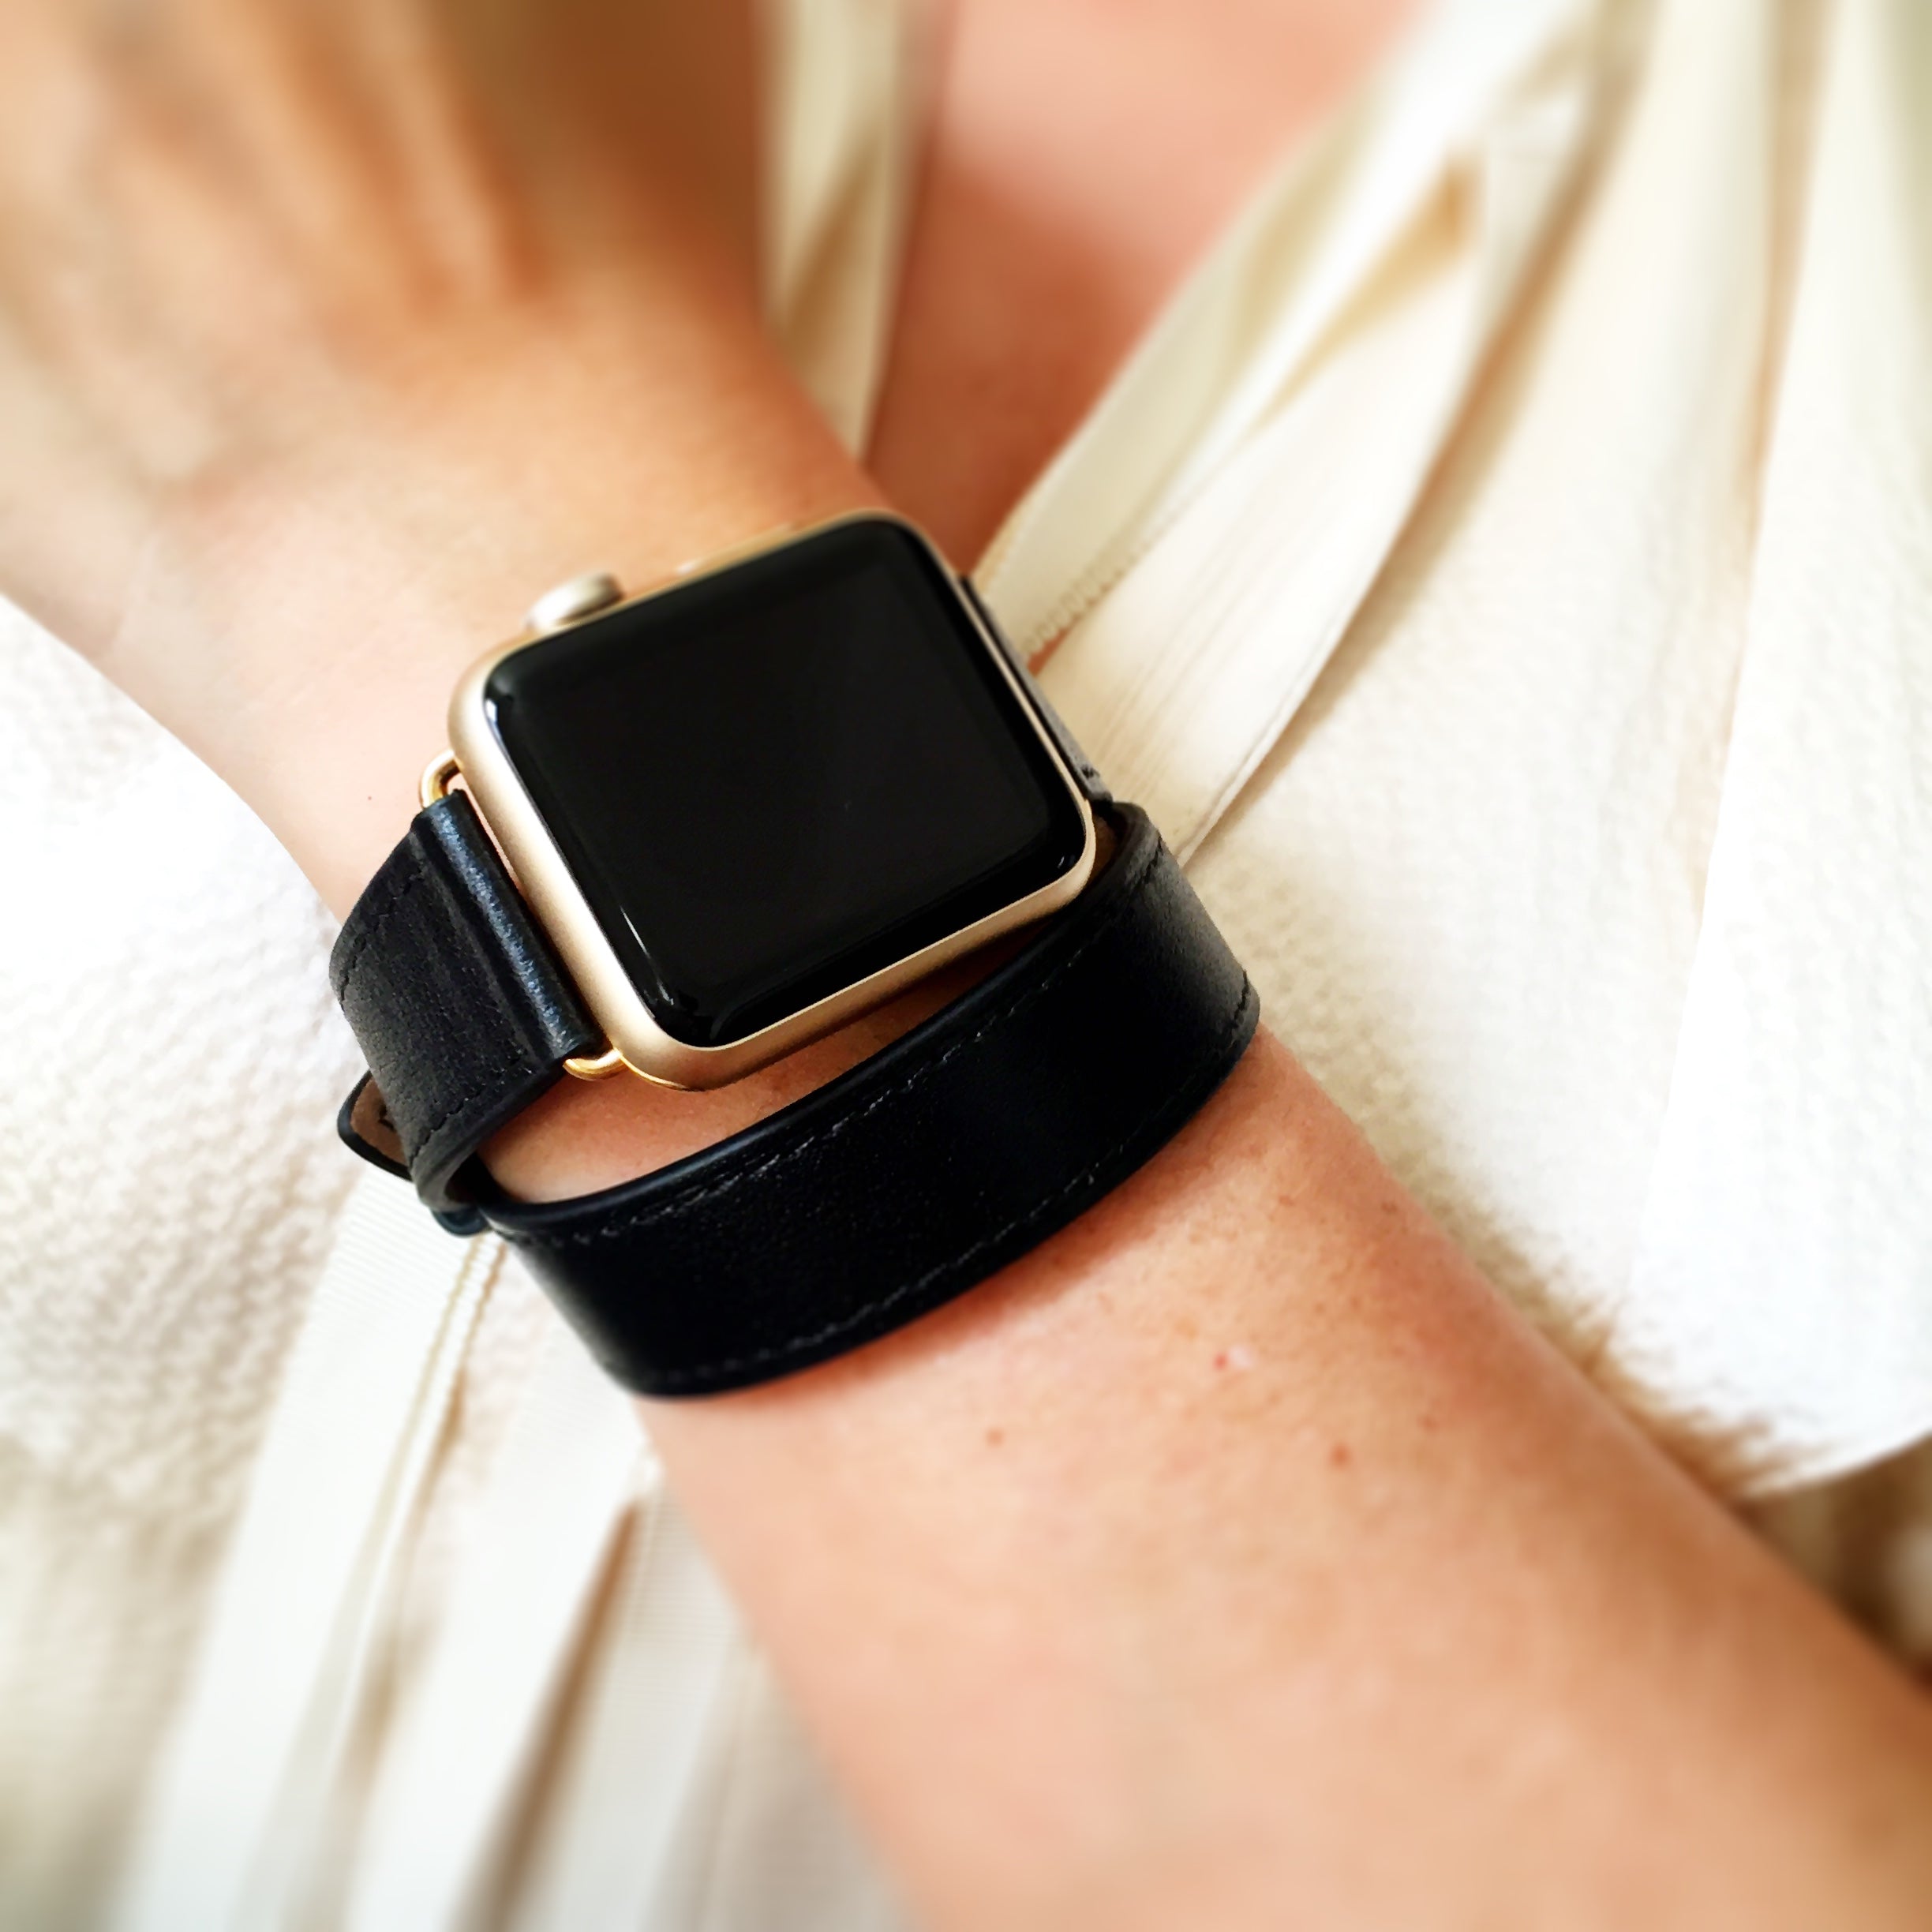 Jet Black Double Wrap Apple Watch Leather Band by Juxli Home.  Handmade, stylish leather strap with rose gold hardware on a 40mm Apple watch on a canvas with a black and gray painting.